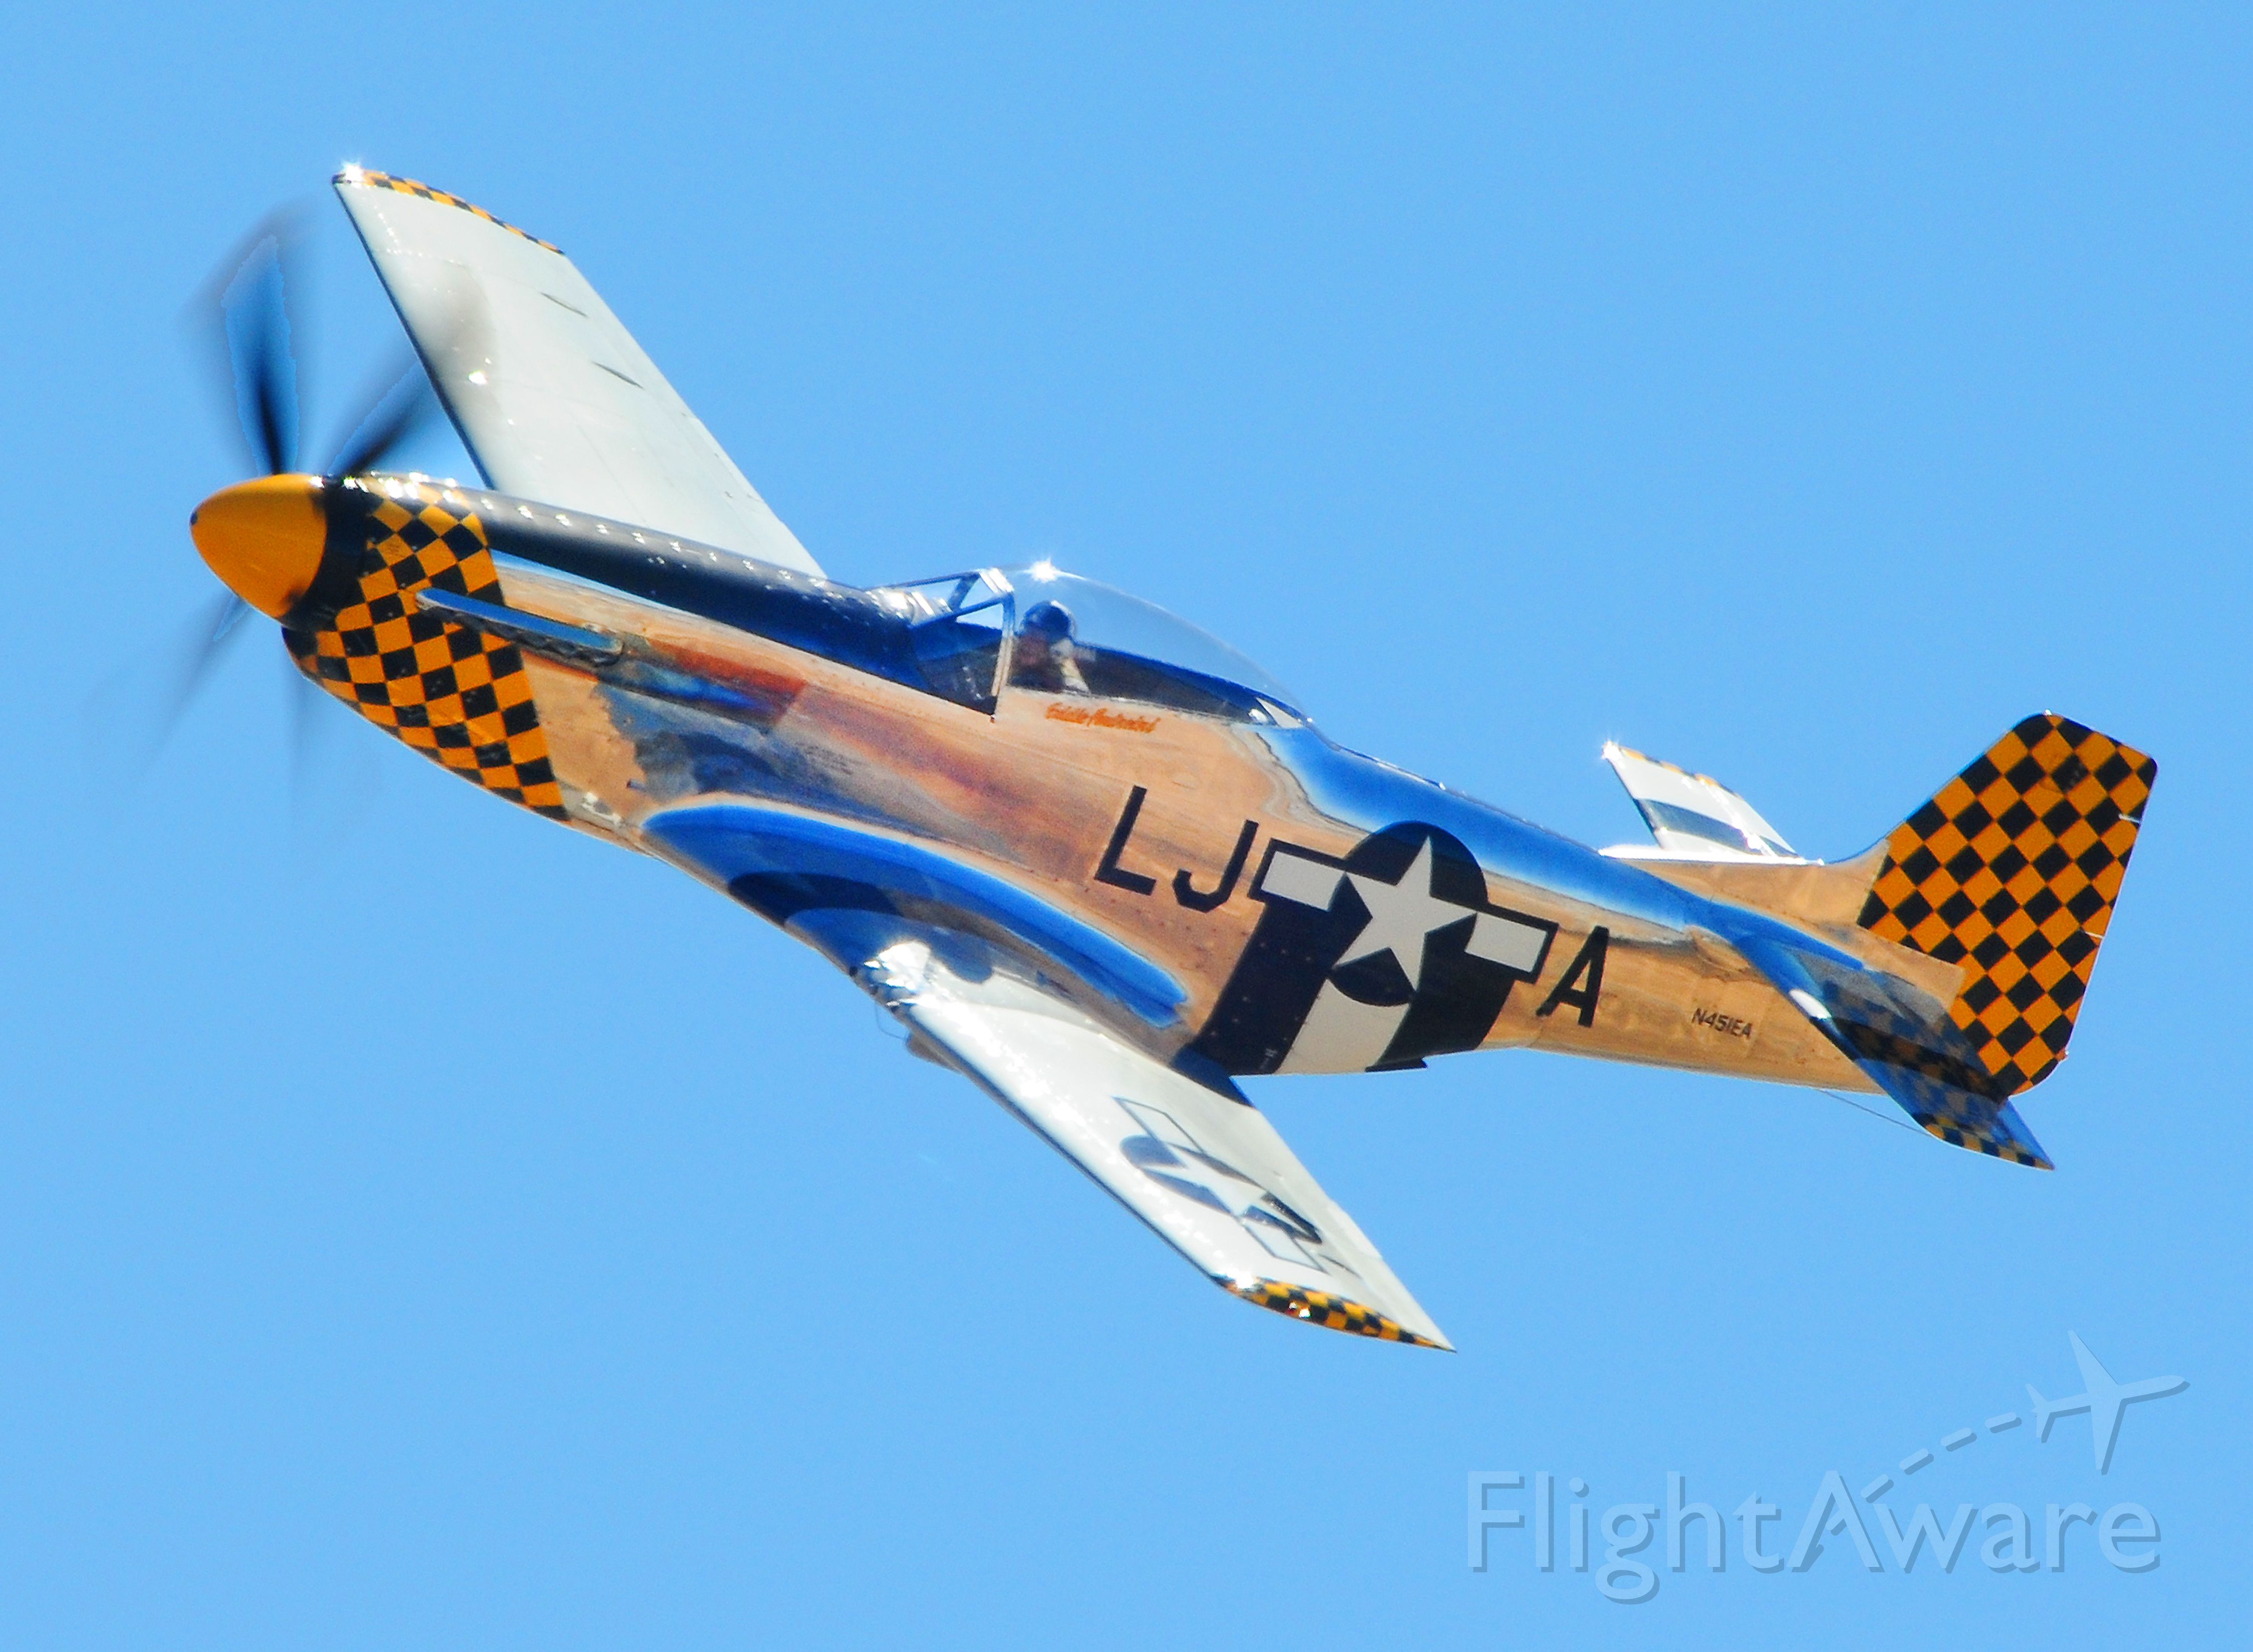 — — - "Kimberly Kay" flown by Eddie Andreini takes to the ski at Mather field, Capitol Air Show 2012 Rancho Cordova, Ca.,